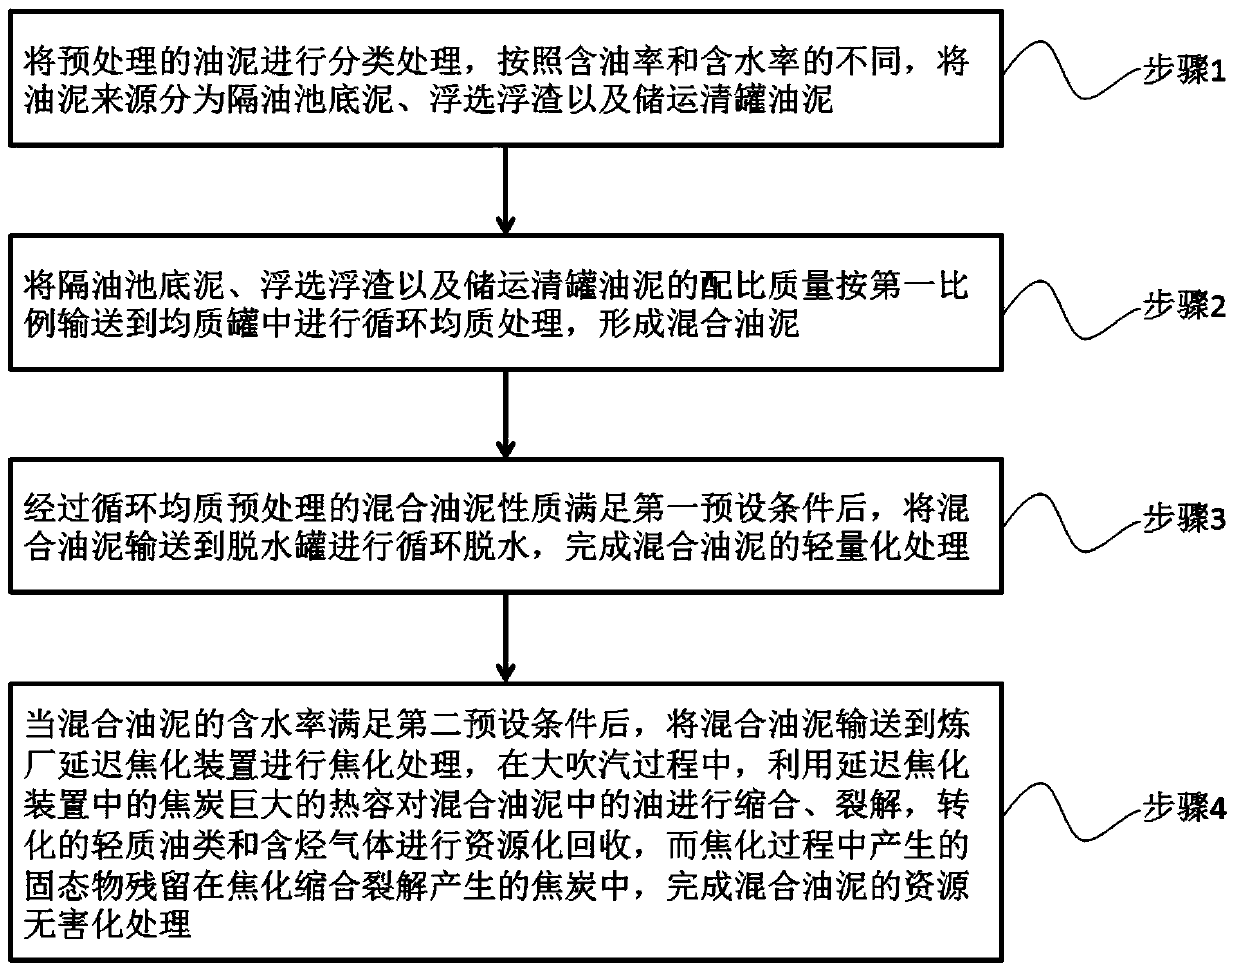 Resource treatment method for petrochemical oily sludge